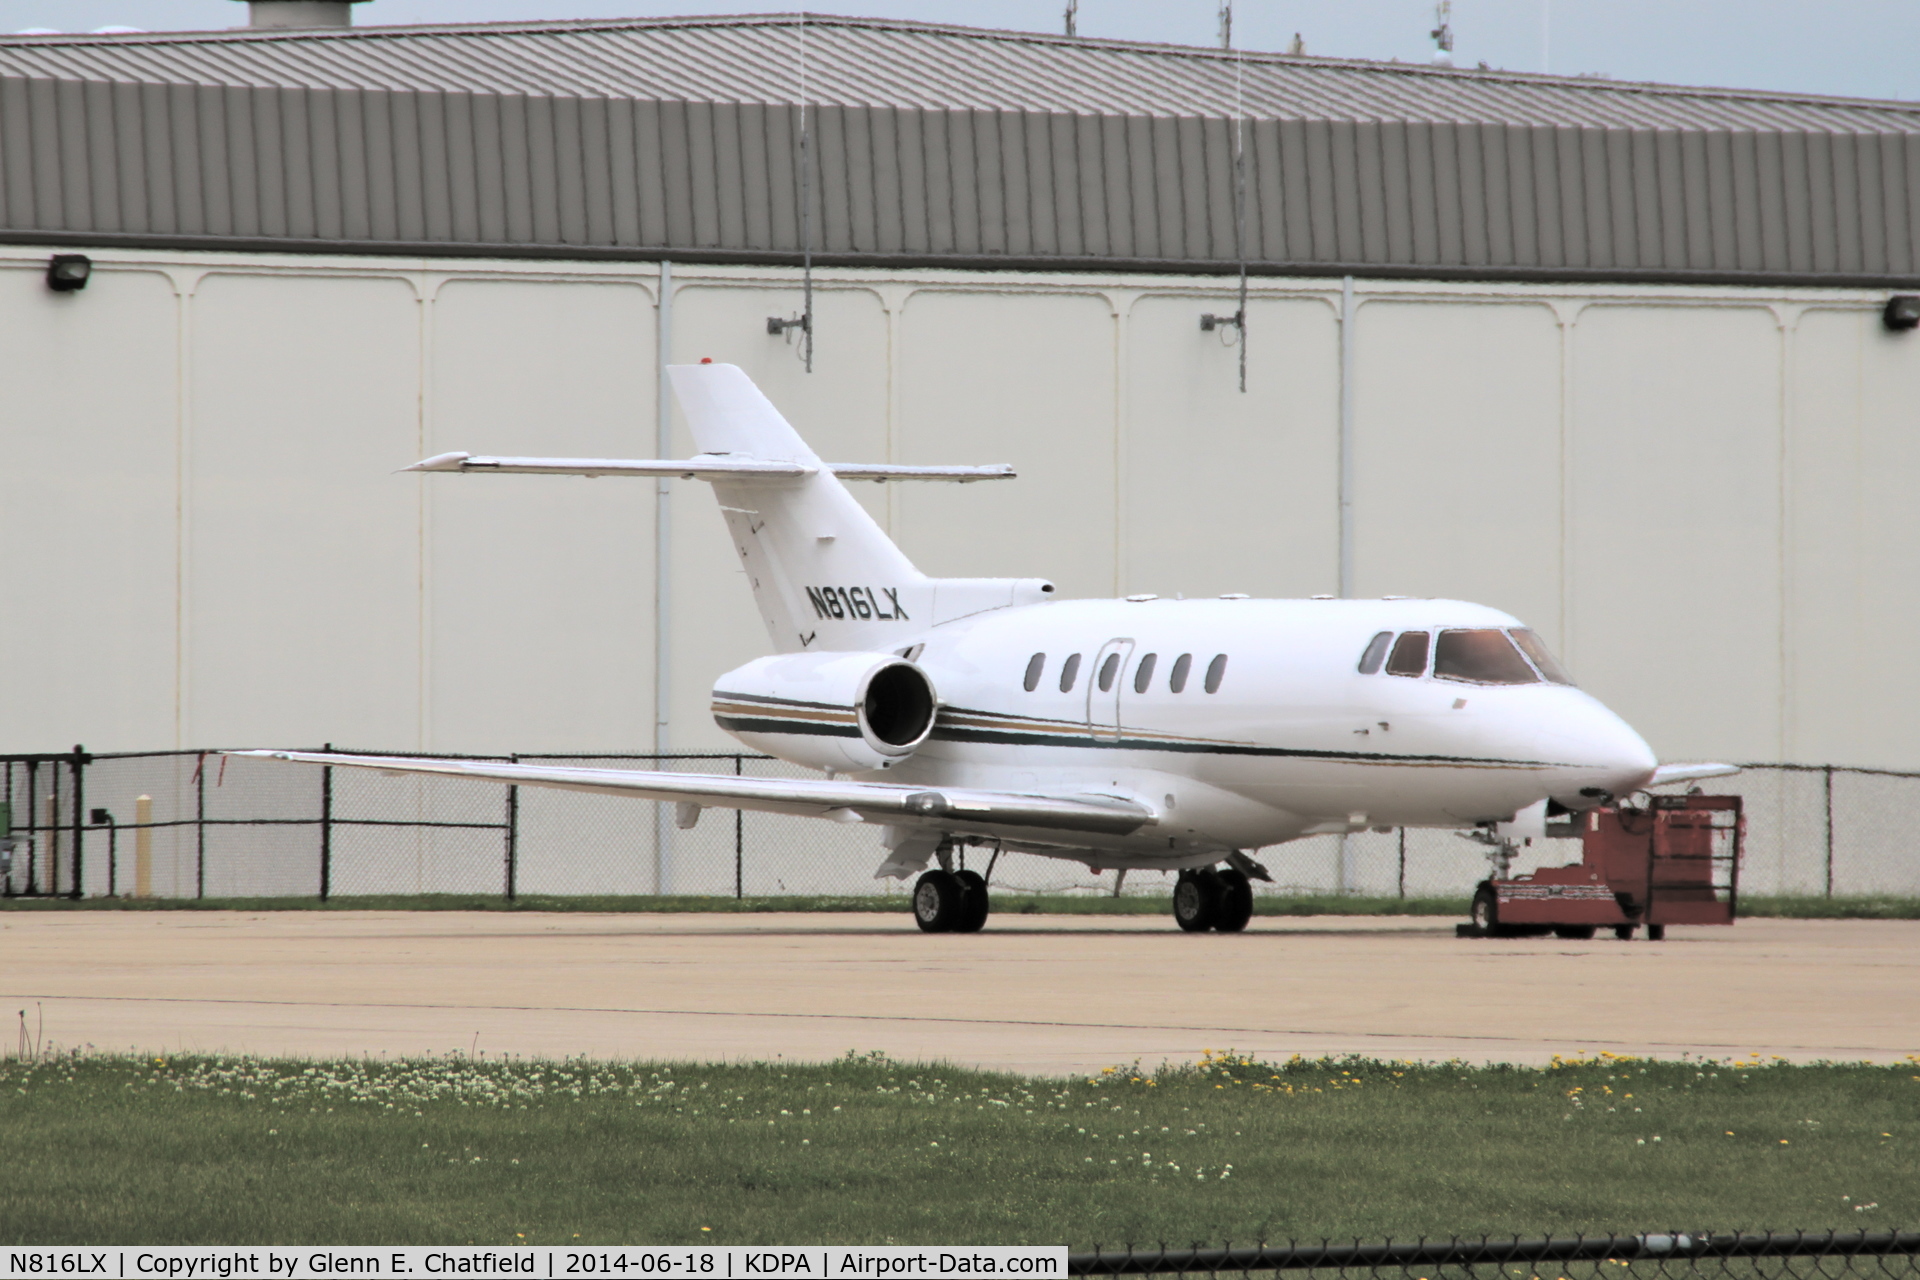 N816LX, 1998 Raytheon Hawker 800XP C/N 258363, Had to stand on my bumper to get the shot